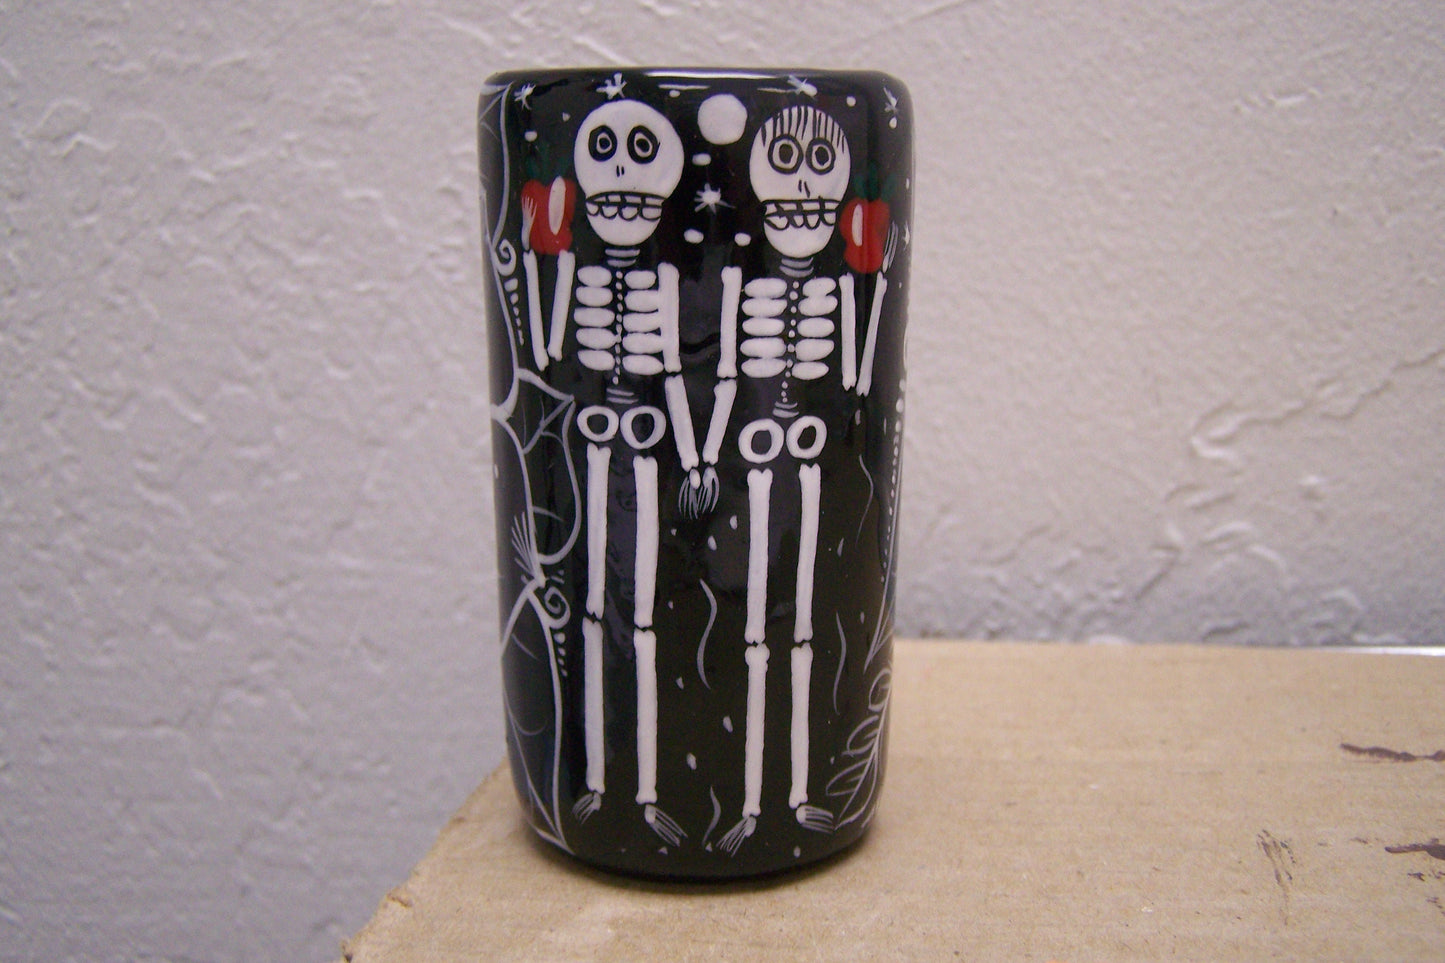 Ceramic Day of the Dead Shot Glass - Skeletons with Apples - Mexico